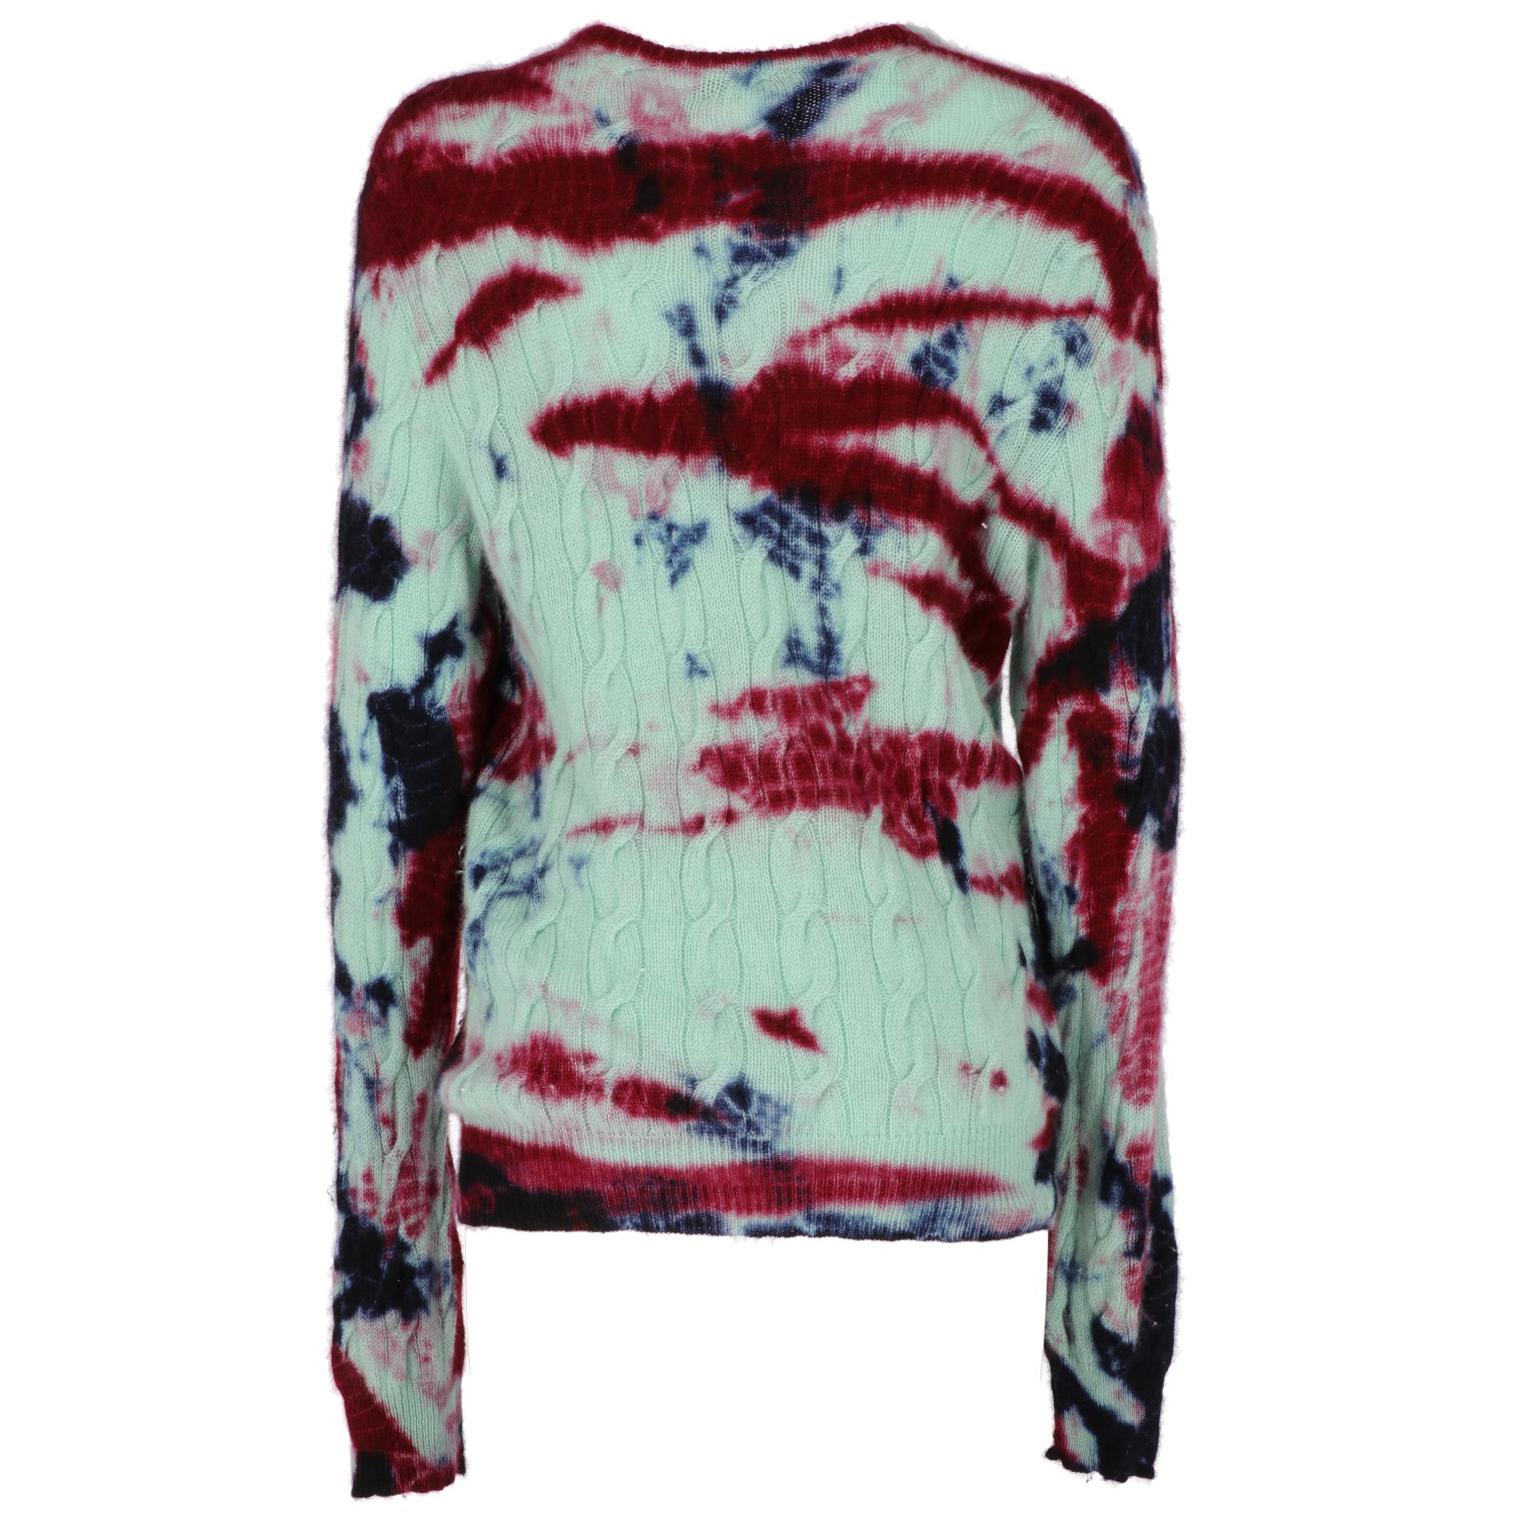 The Ralph Lauren braided sweater features a round neck, subsequently it has been subjected to a fuchsia, seafoam green and blue tones tie and dye treatment. 
Years: 2000s
Size: M IT

Linear measures

Height: 69,5 cm
Bust: 44 cm
Shoulder: 48